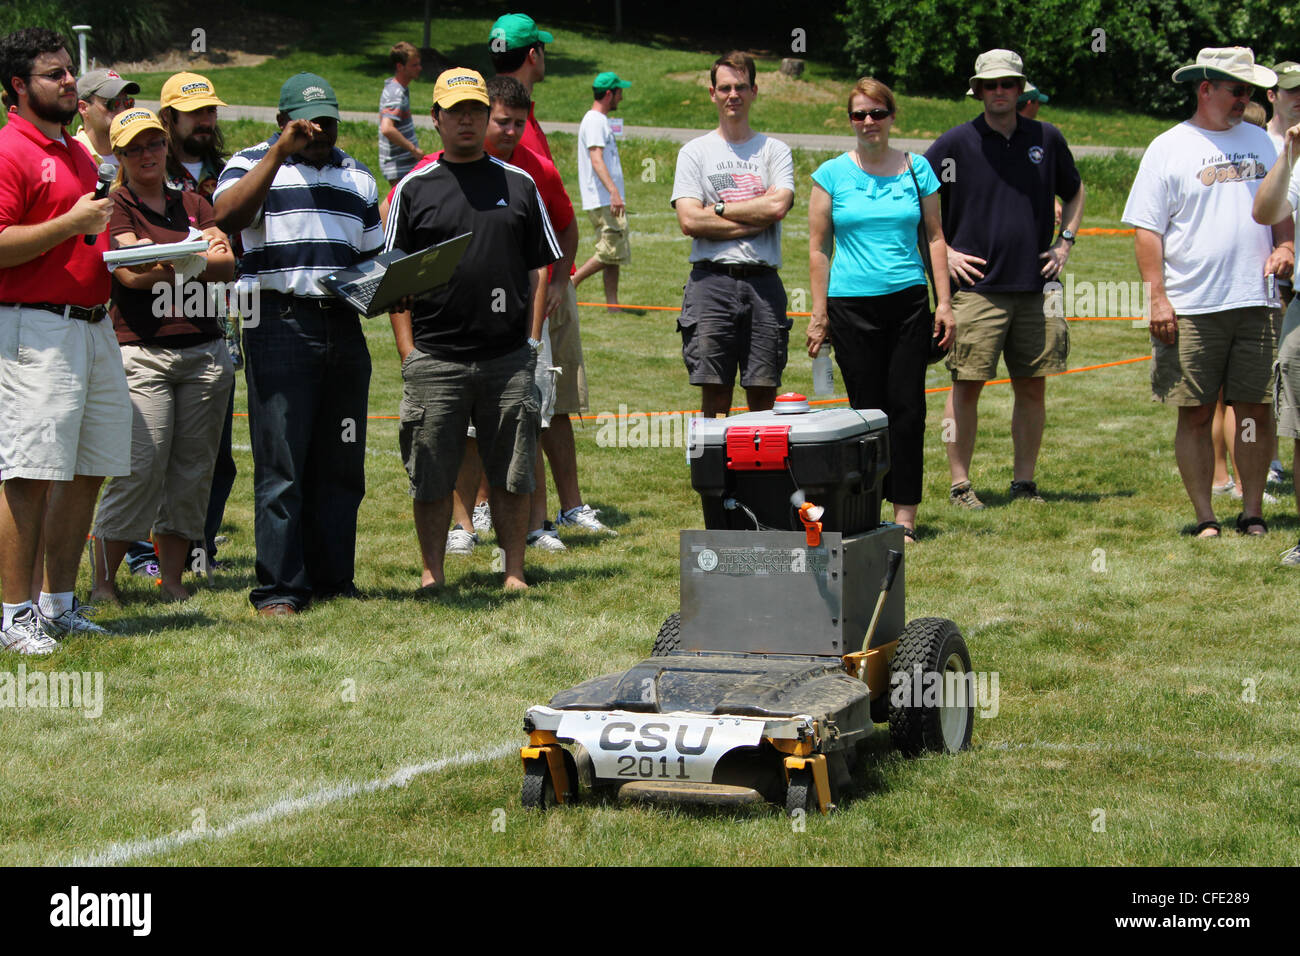 Experimental Robotic Lawn Mower by team Cleveland State University. Stock Photo